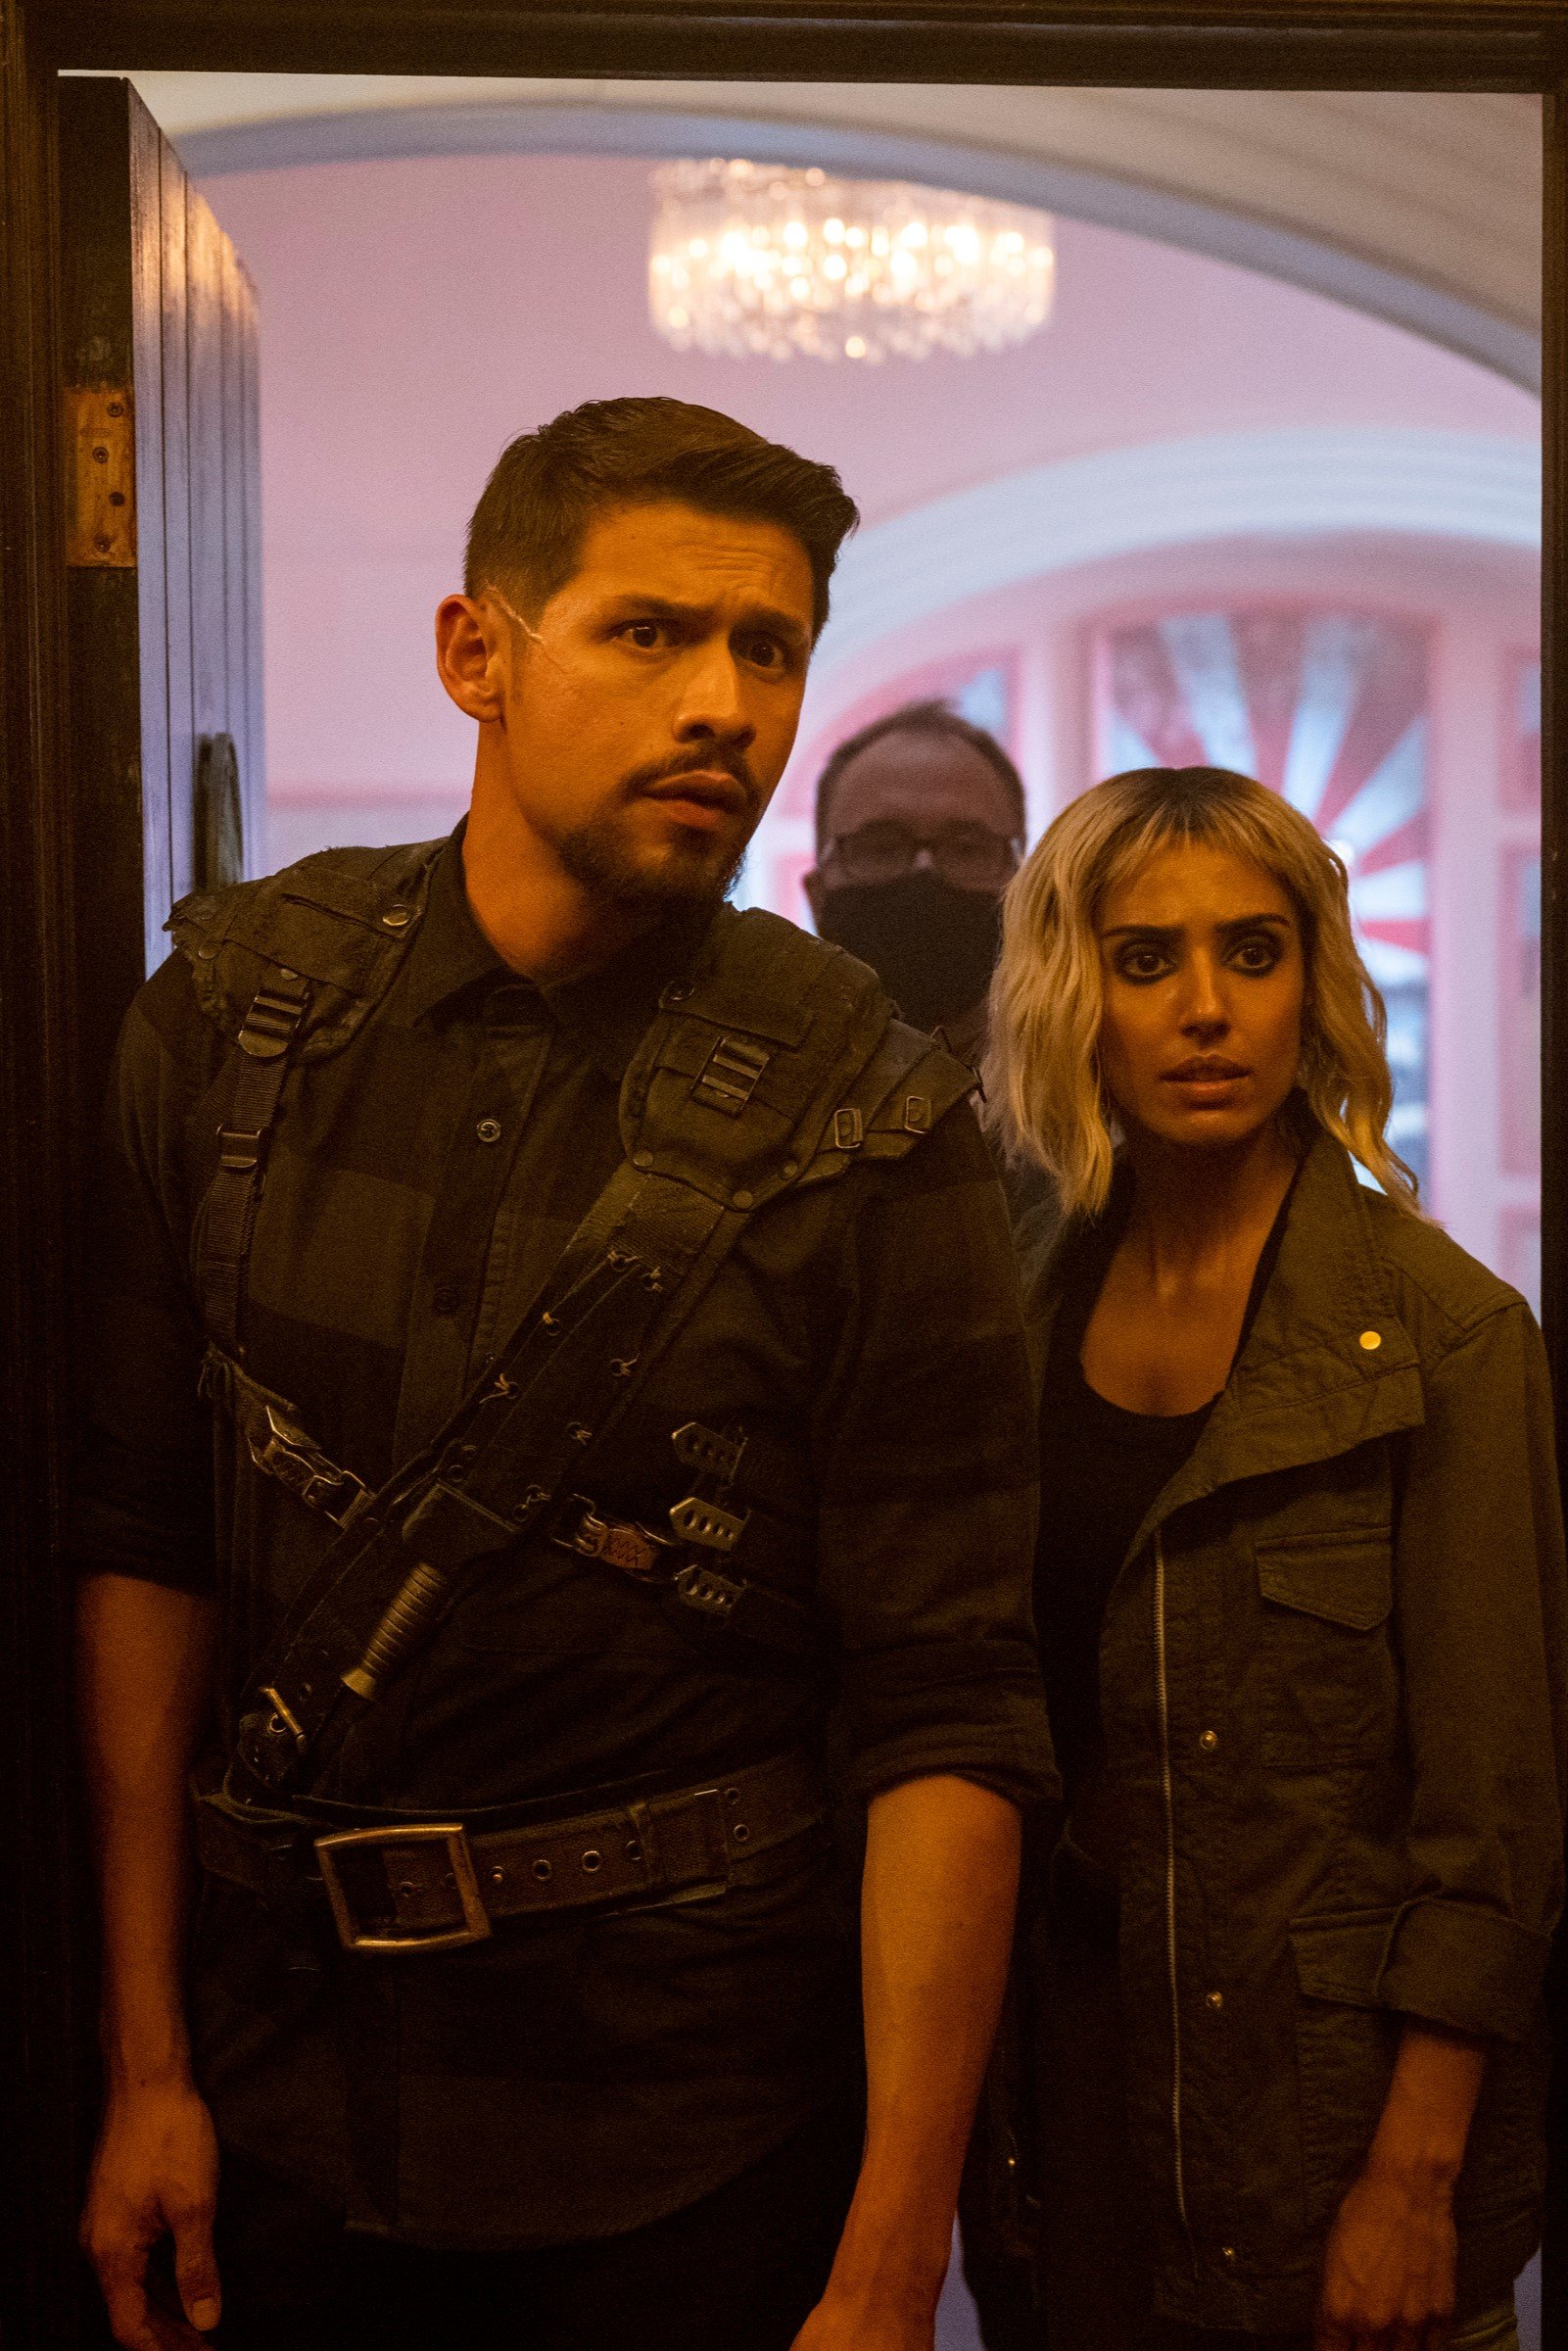 Diego and Allison together on The Umbrella Academy.